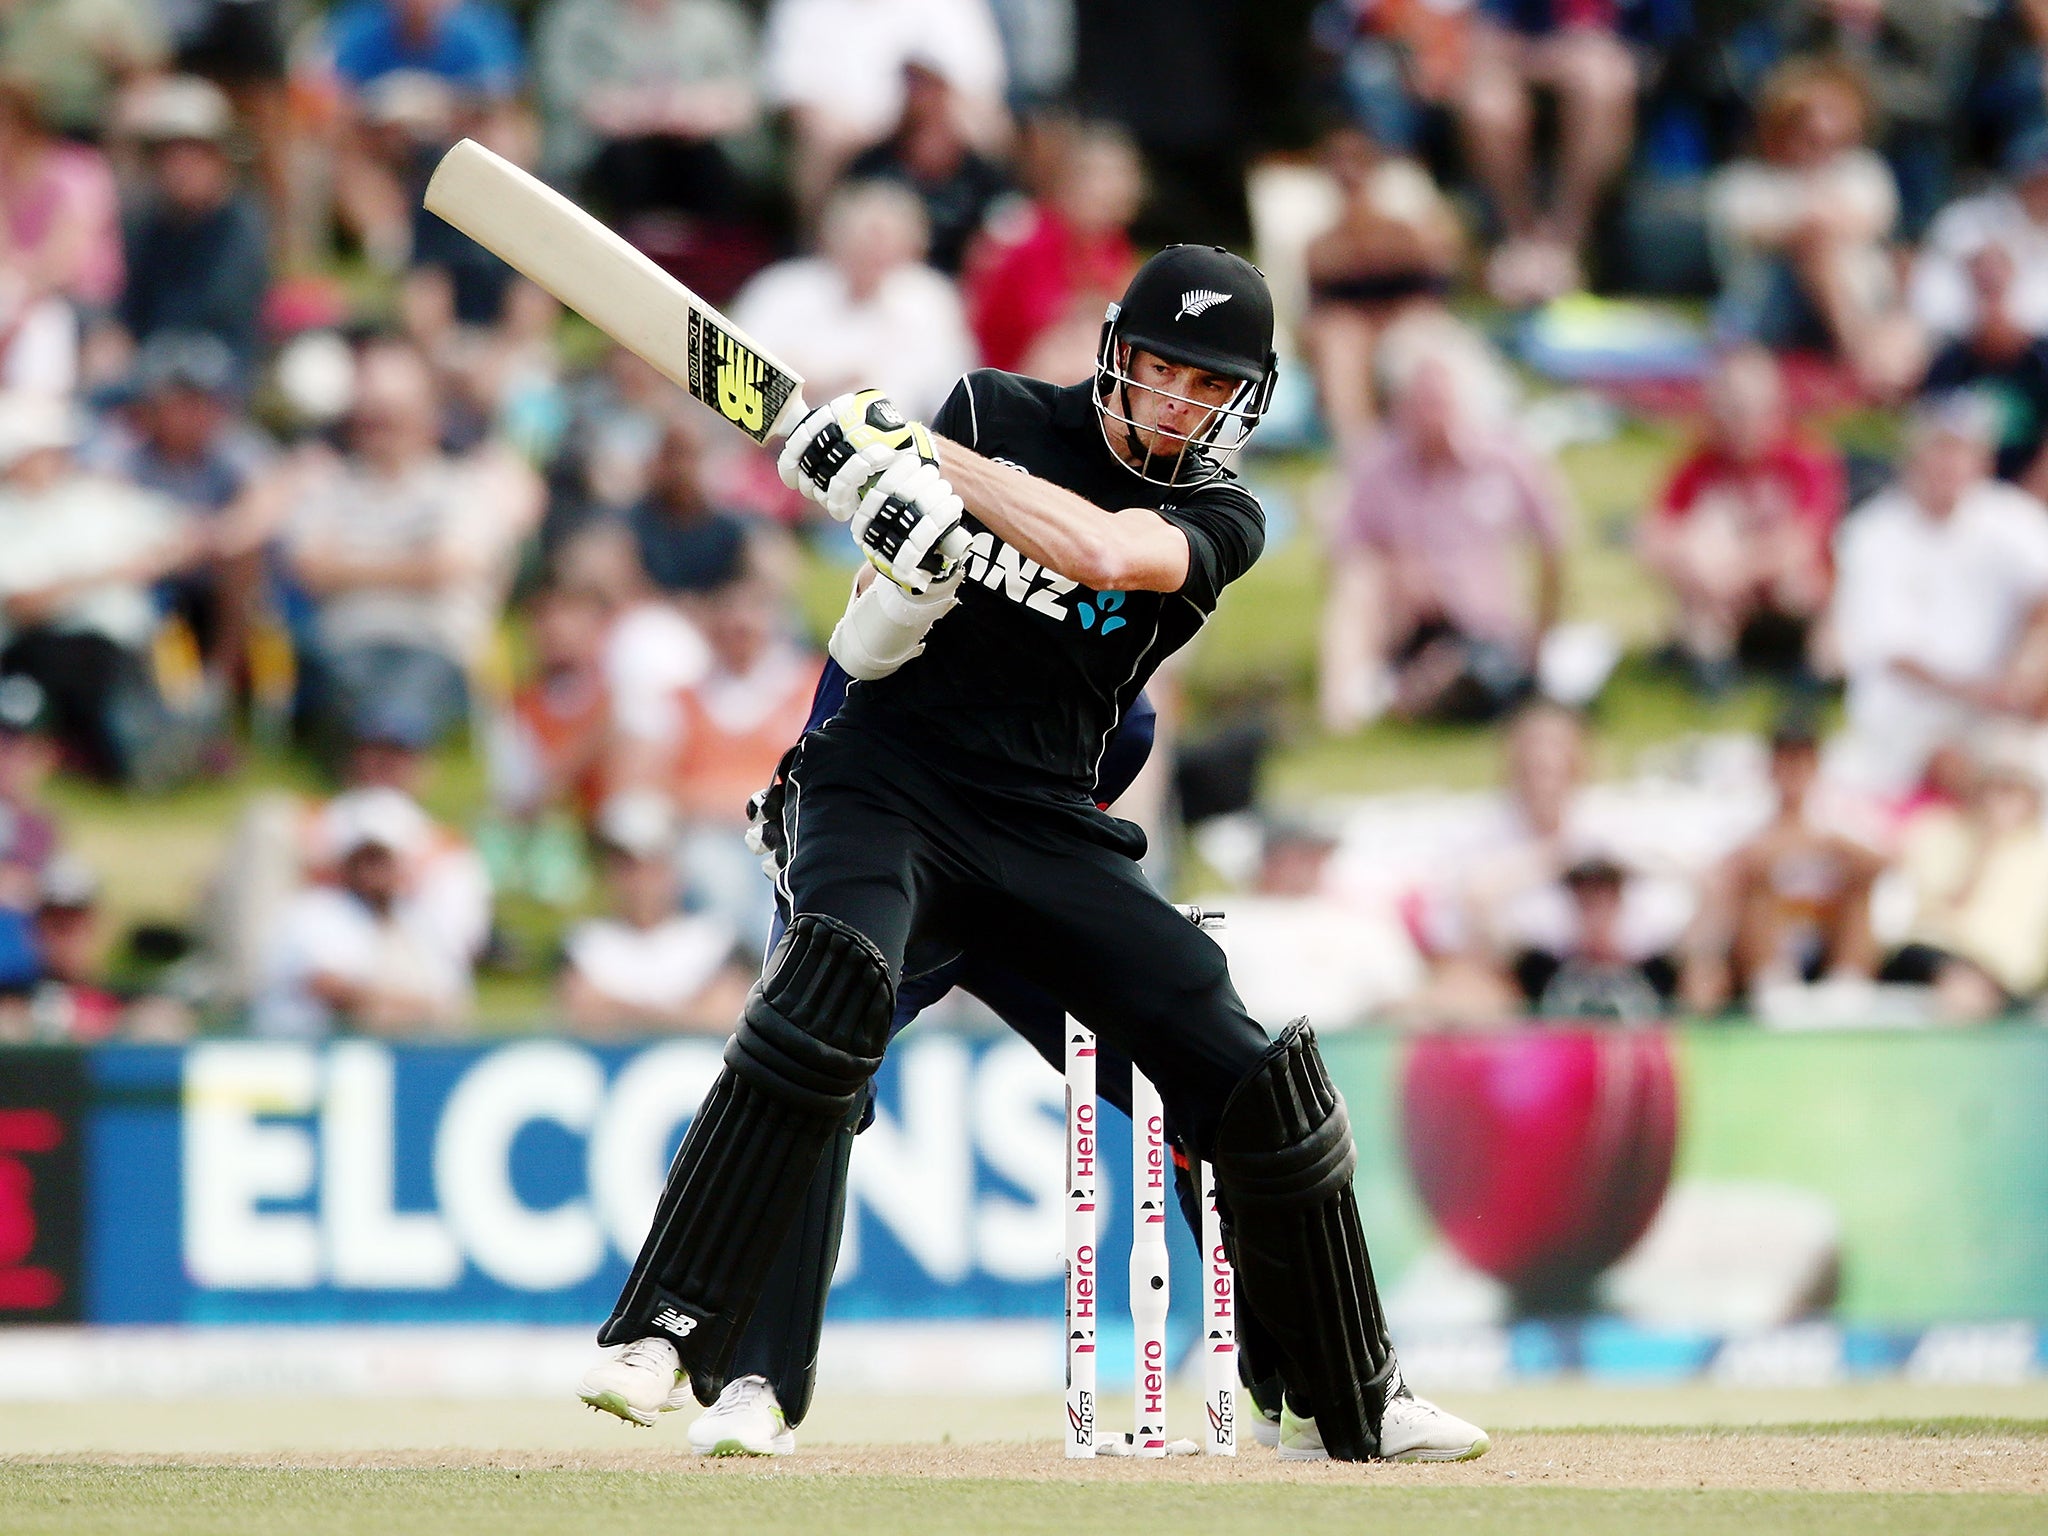 Mitchell Santner top scored for New Zealand with 63 not out